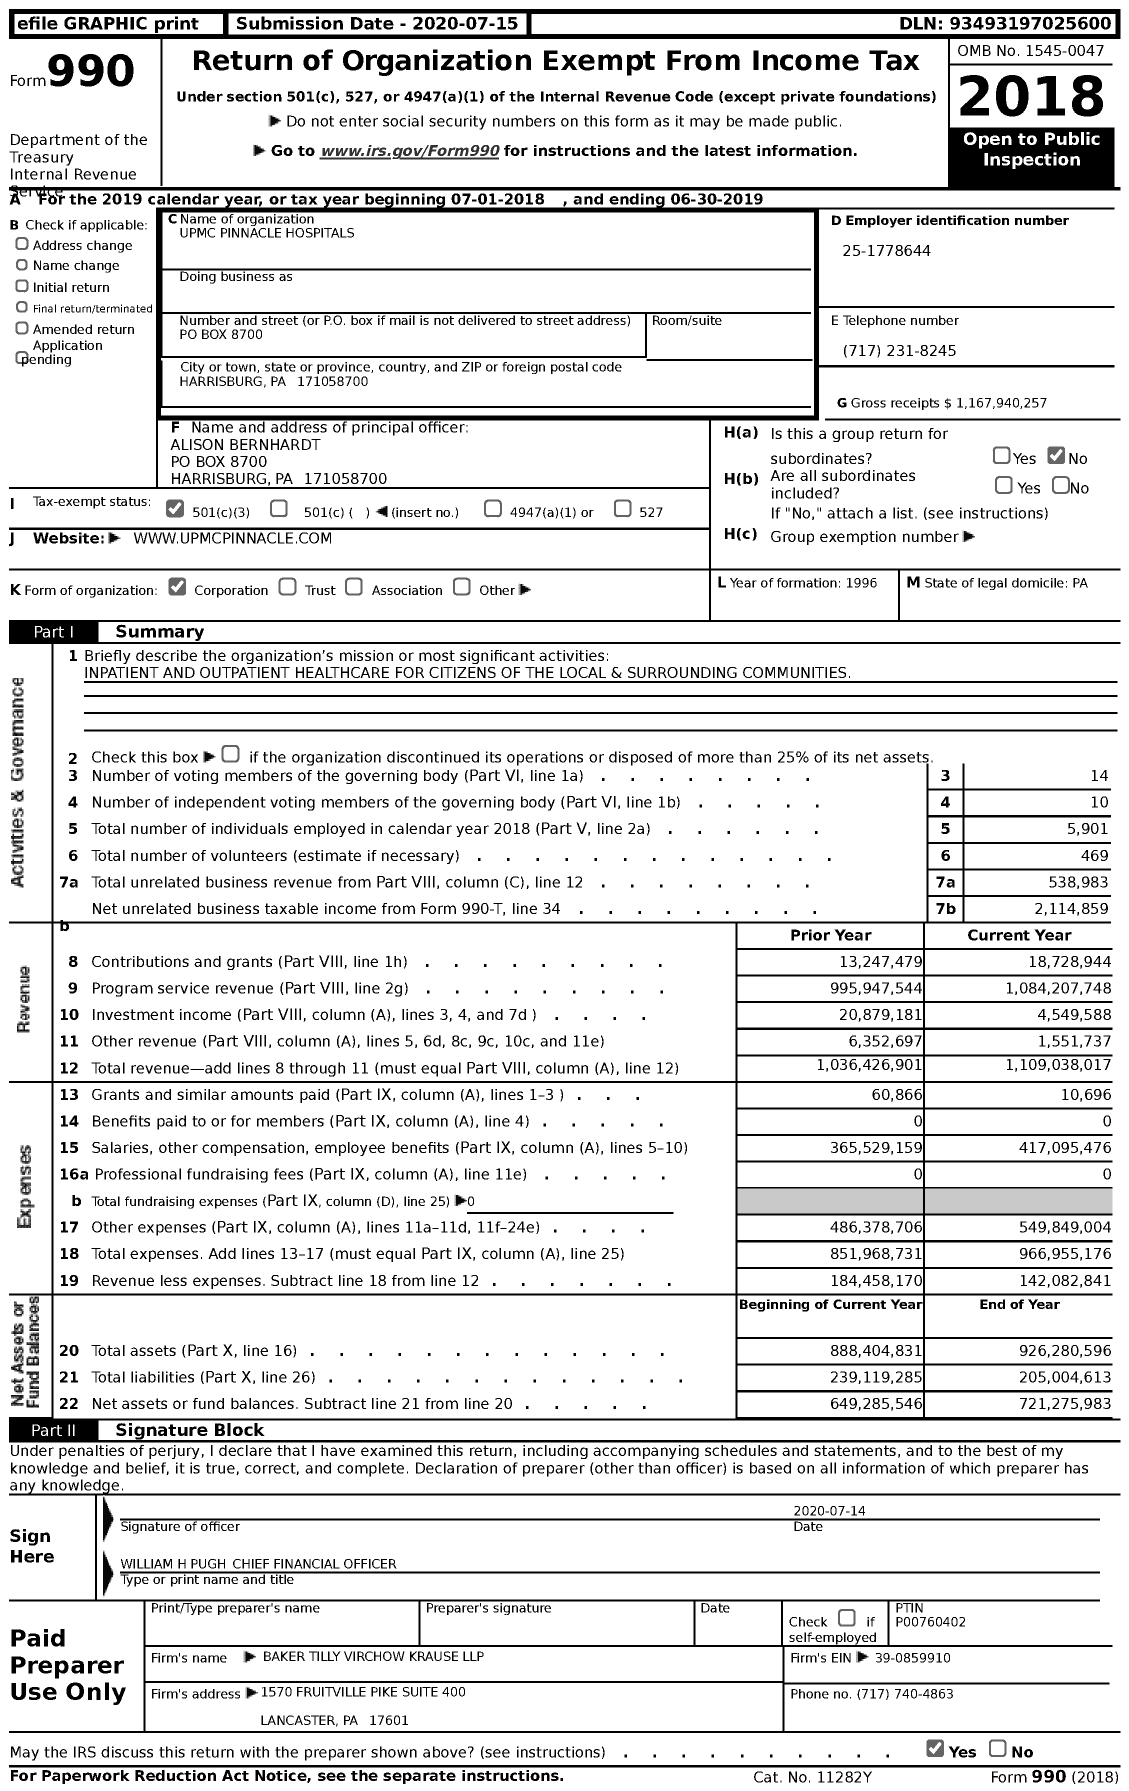 Image of first page of 2018 Form 990 for Upmc Pinnacle Hospitals